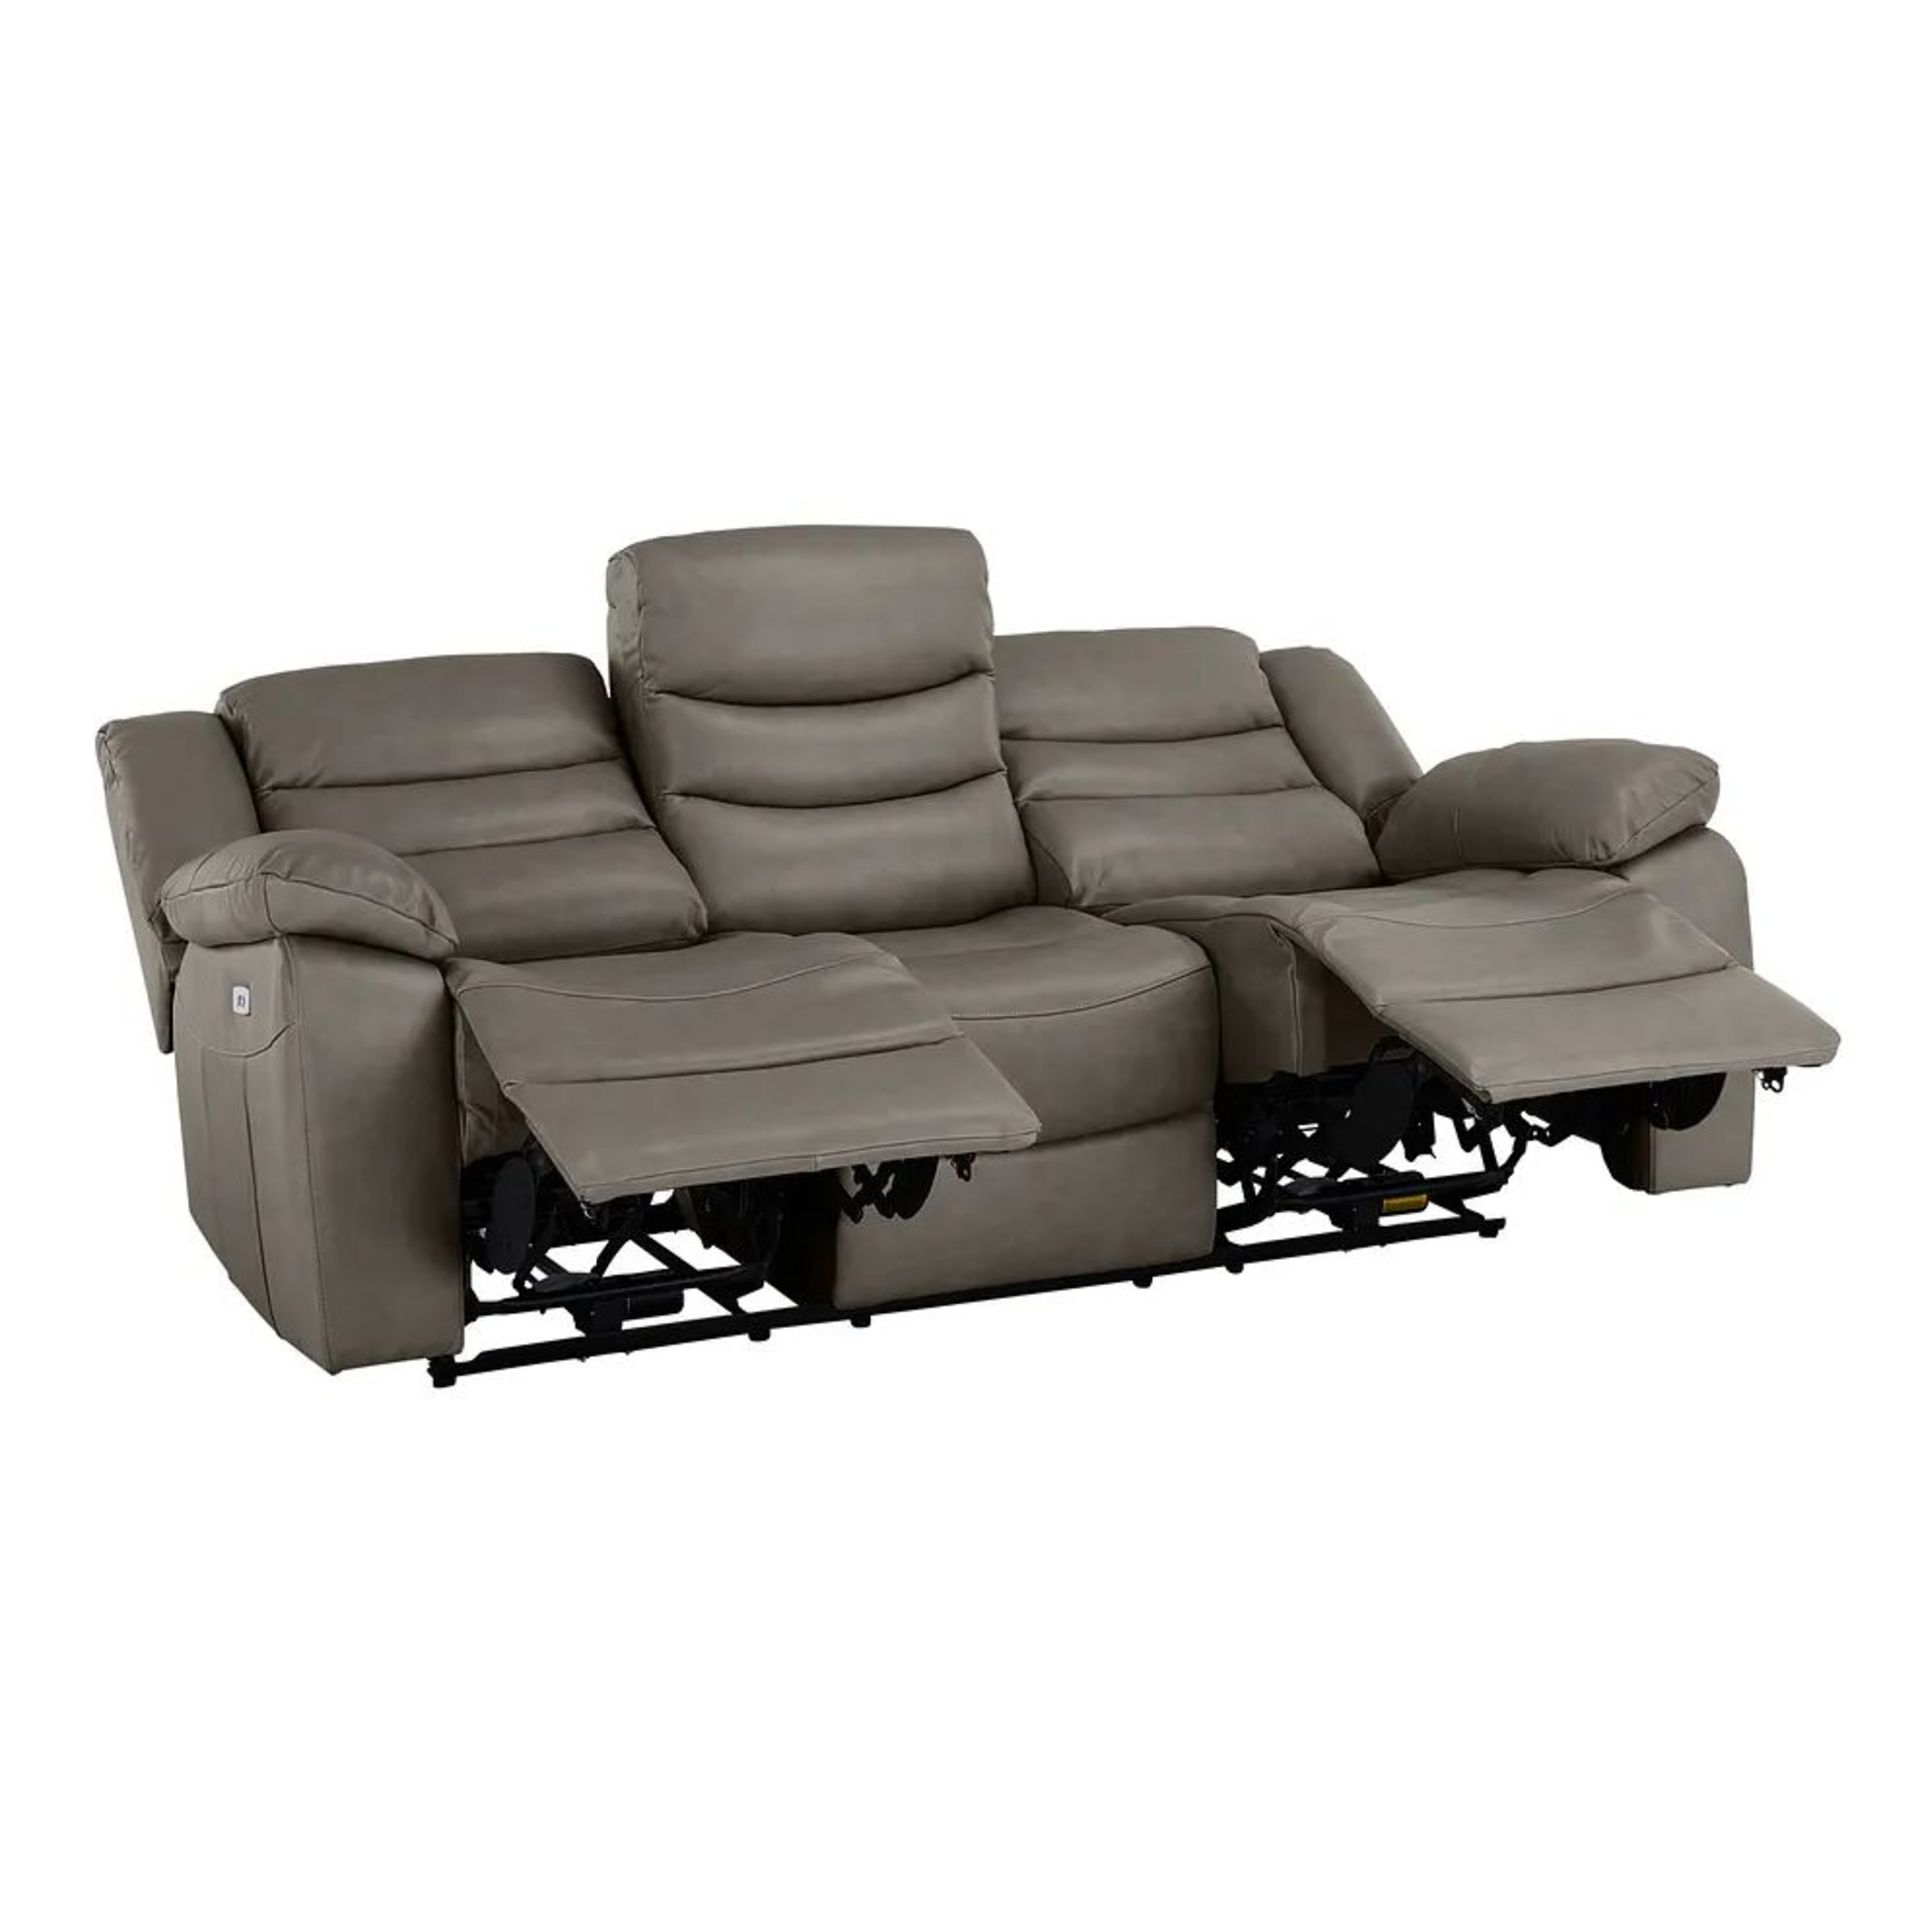 BRAND NEW MARLOW 3 Seater Electric Recliner Sofa - DARK GREY LEATHER. RRP £1849. Our Marlow - Bild 5 aus 11